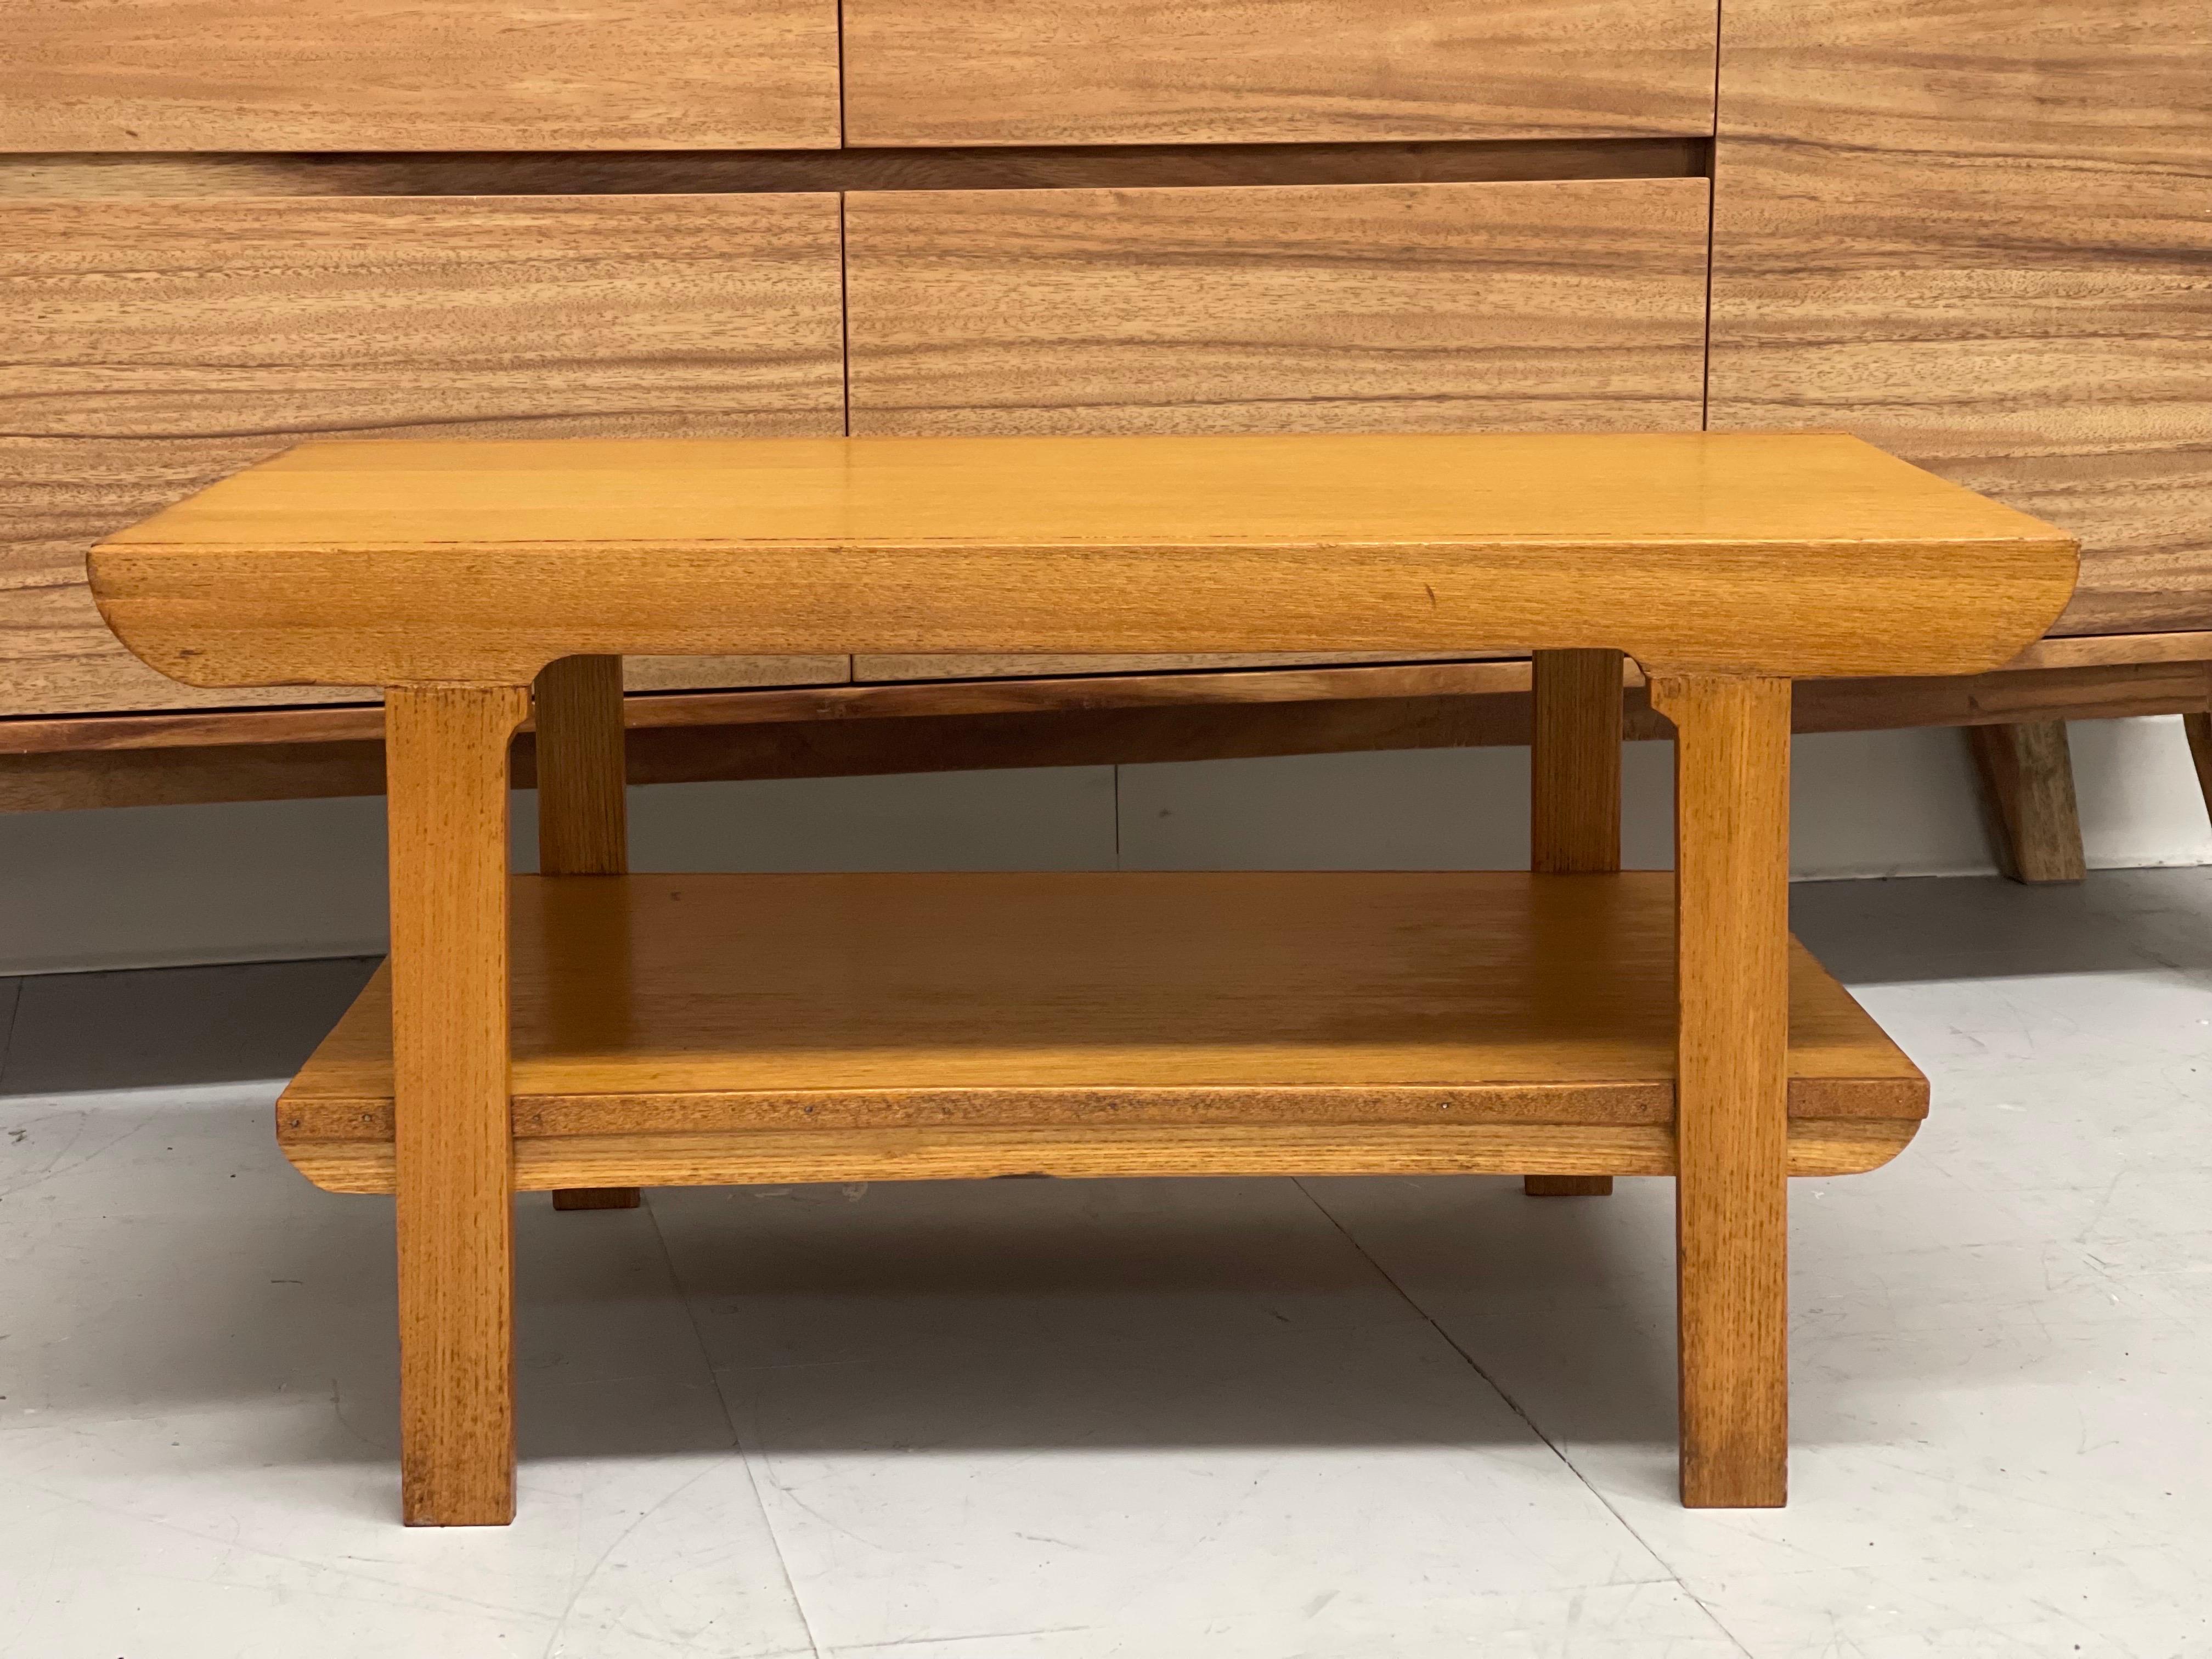 Vintage Mid-Century Modern table. UK Import.

Dimensions. 27 1/2 W ; 17 D ; 14 H.